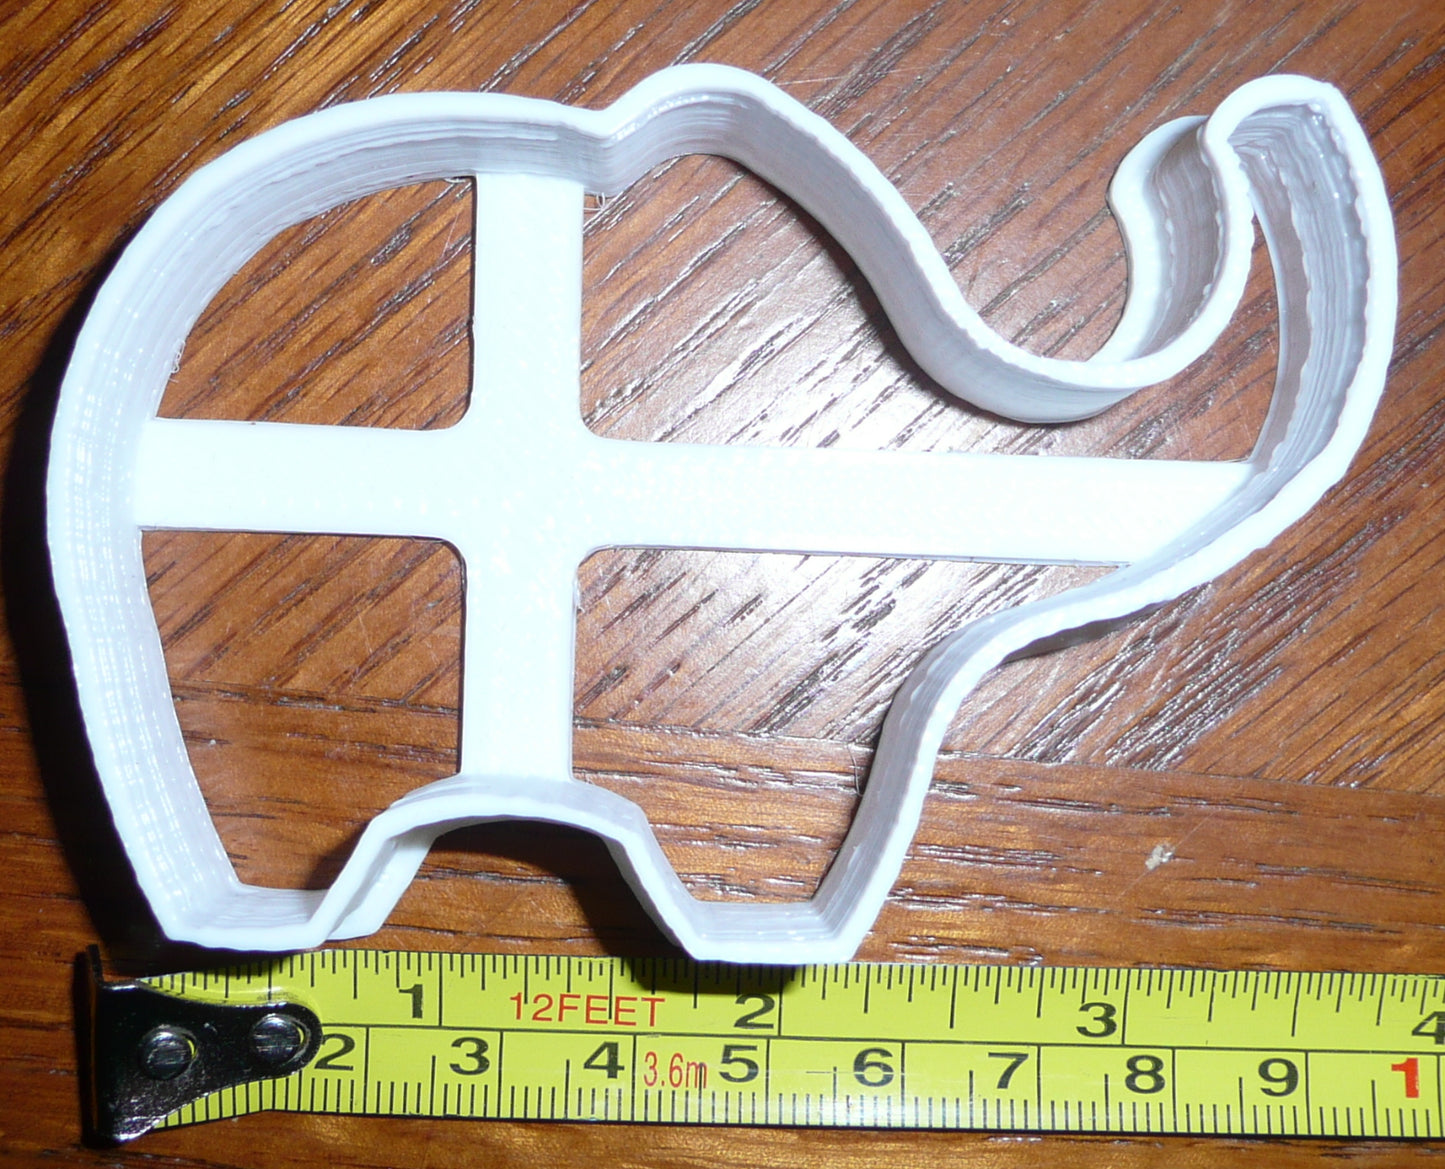 Elephant Full Cookie Cutter Baking Tool Special Occasion Made In USA PR310